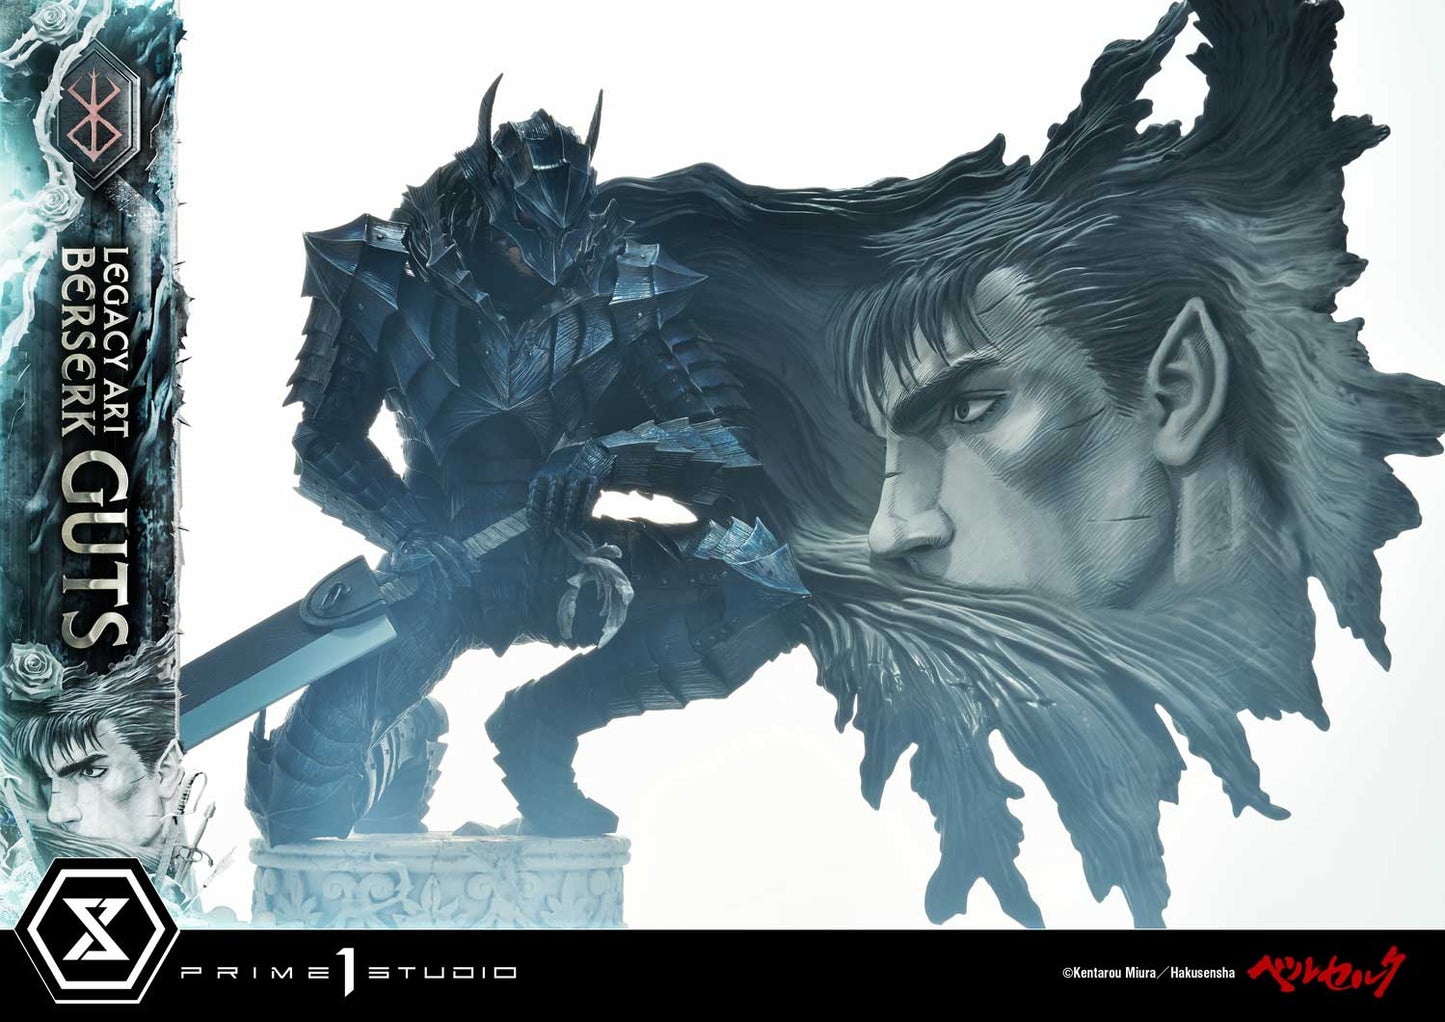 Prime 1 - Guts and Griffith